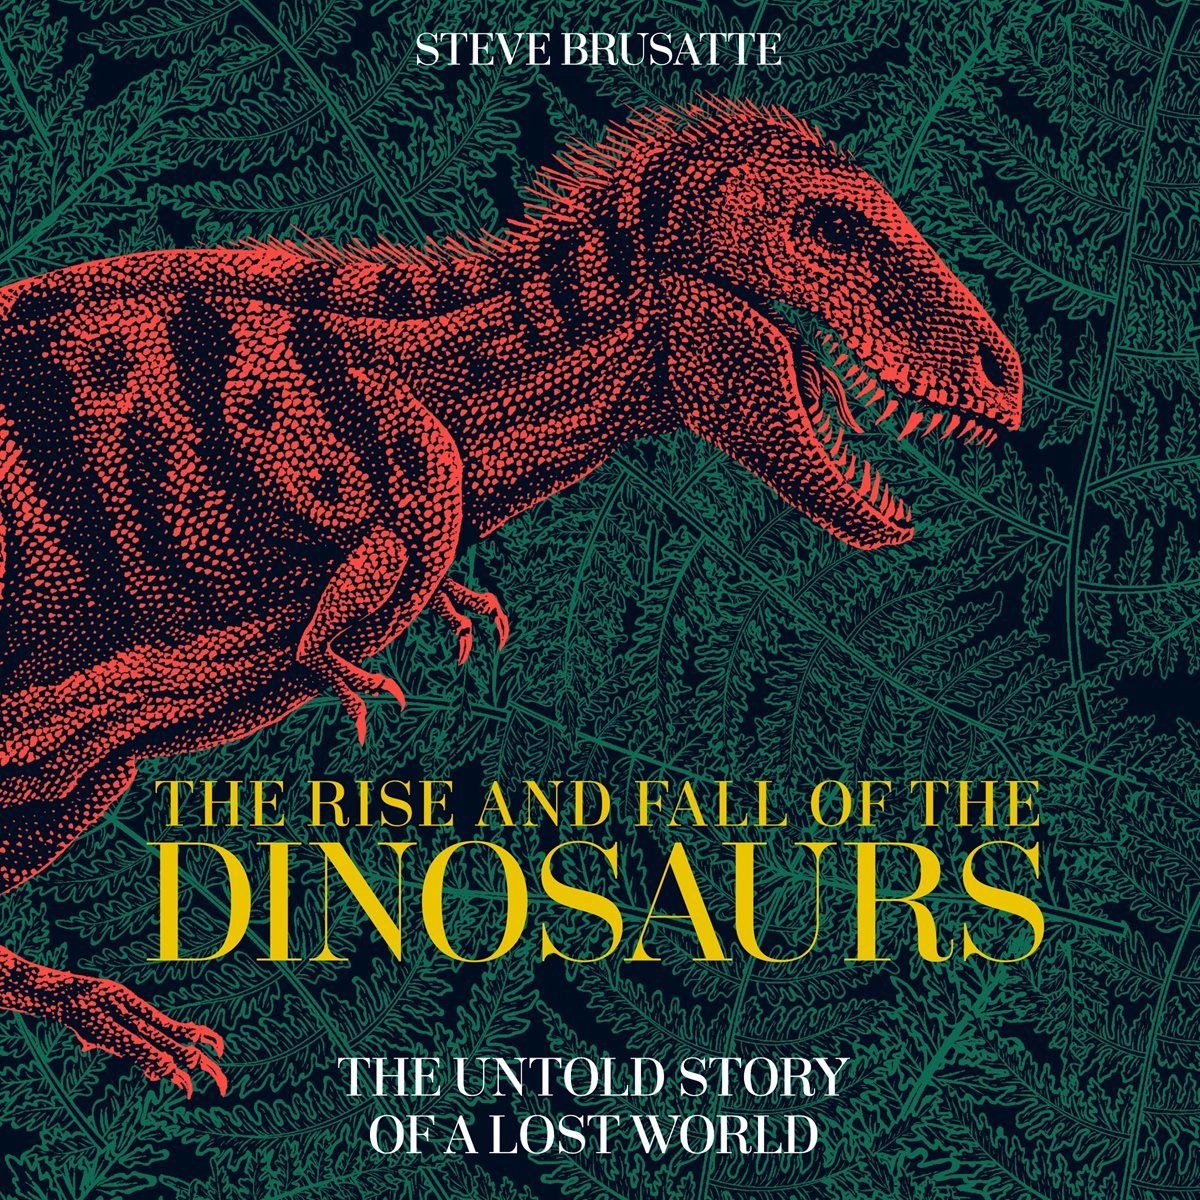 The Rise and Fall of the Dinosaurs The Untold Story of a Lost World - Steve Brusatte